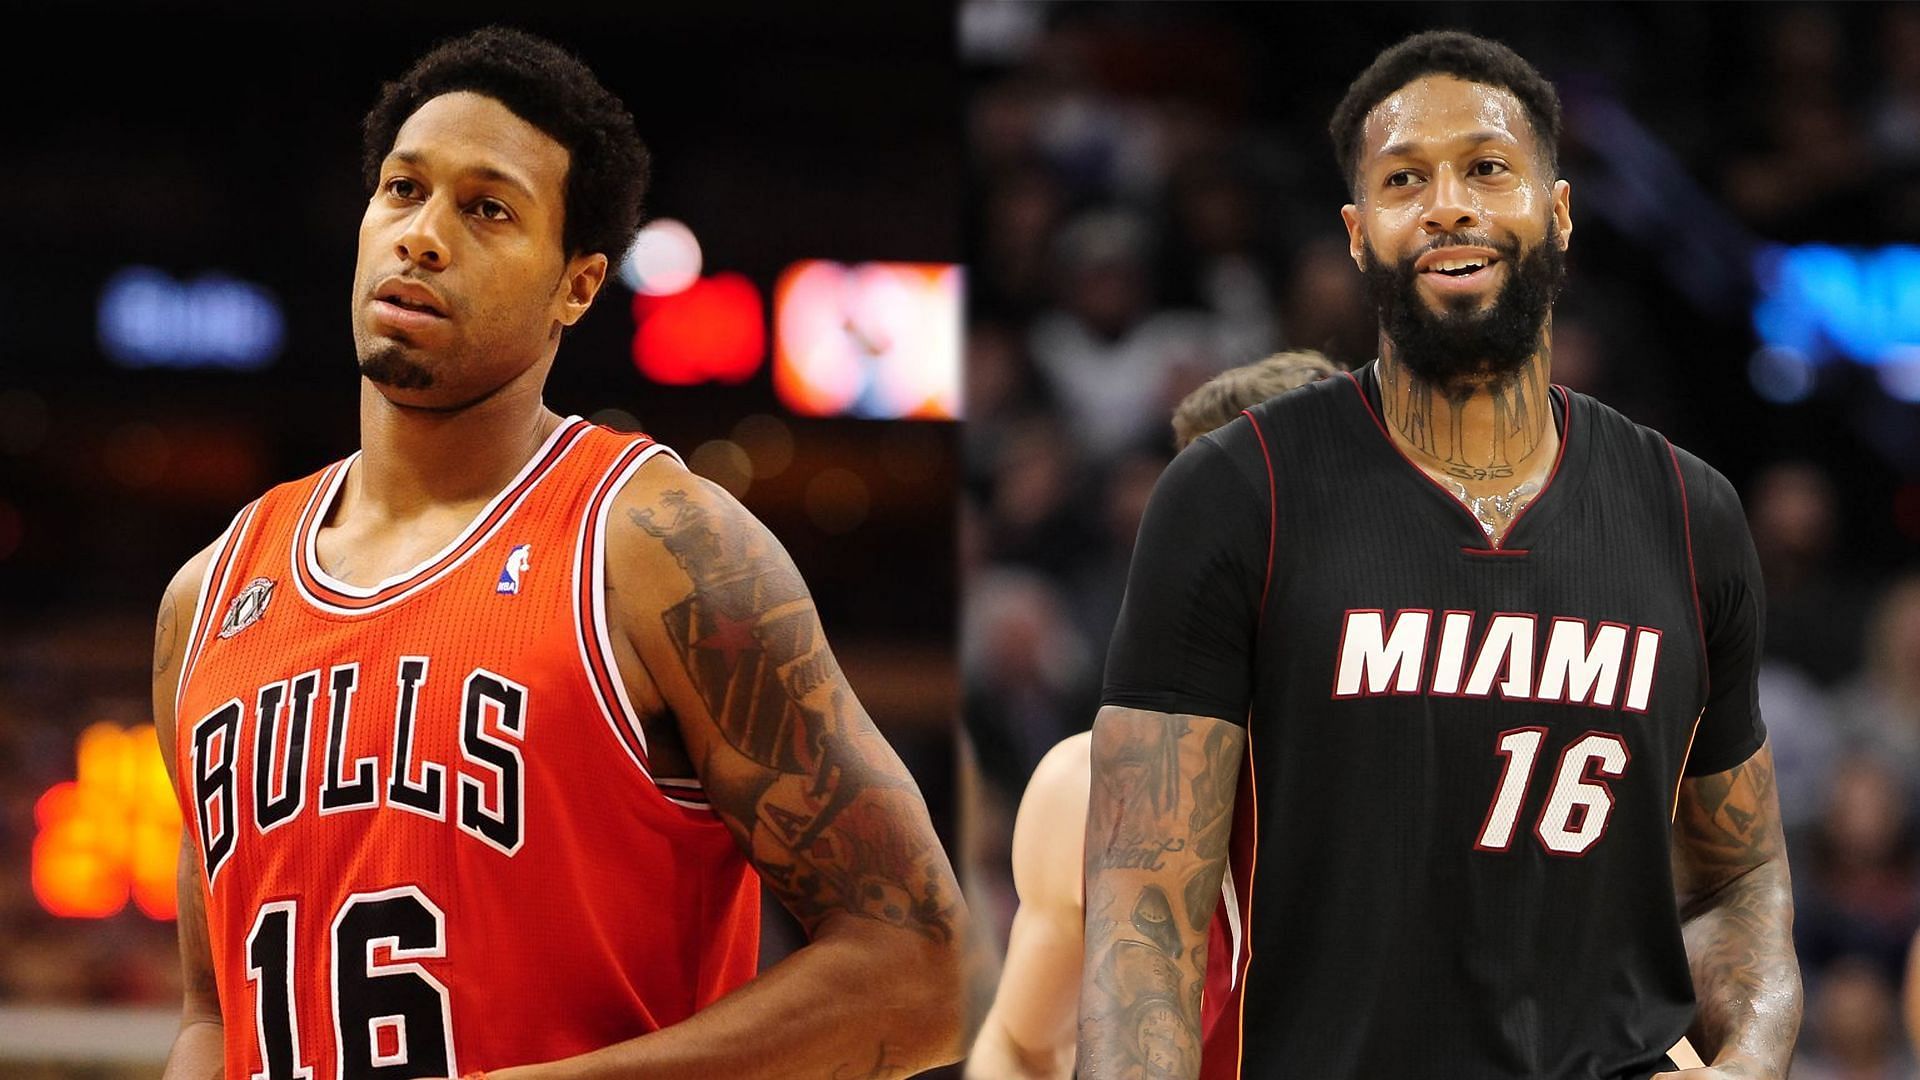 James Johnson was one of the most improved NBA players in Miami